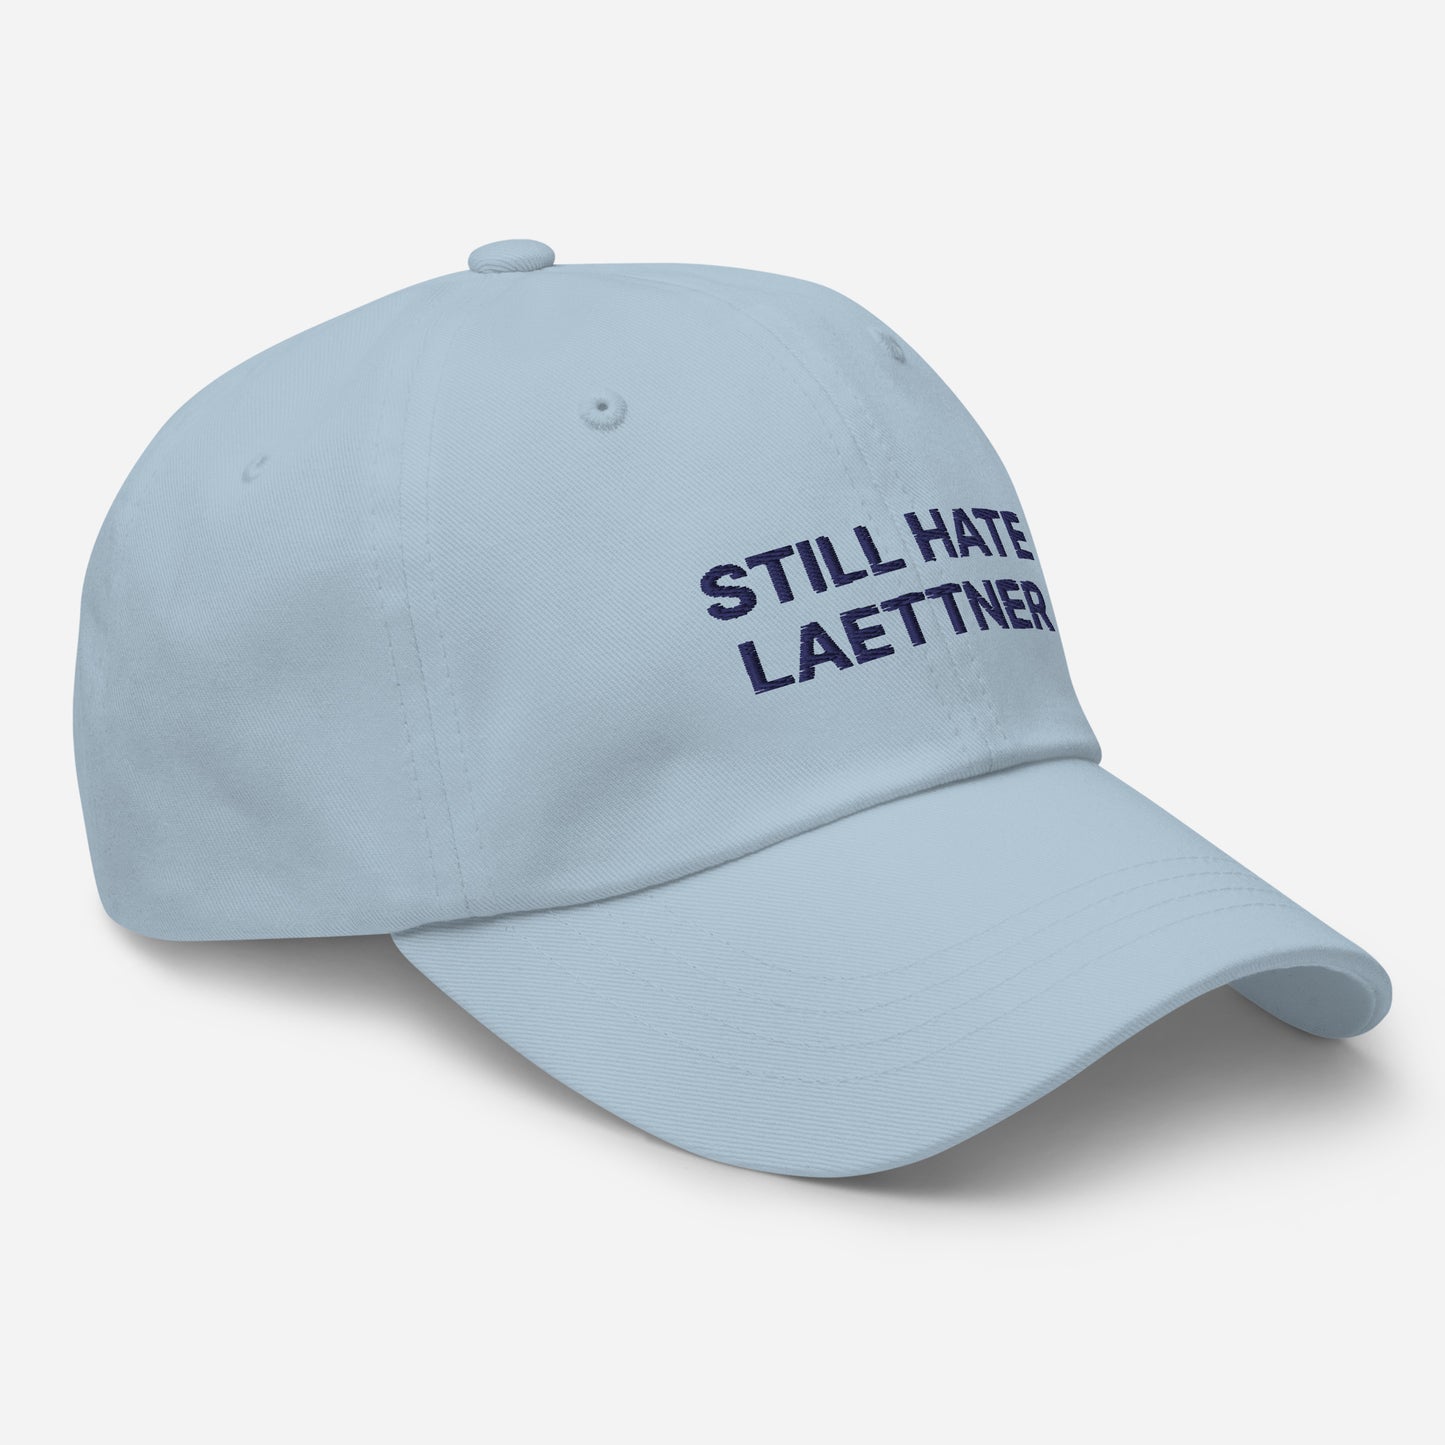 "STILL HATE LAETTNER" UNC basketball embroidered hat